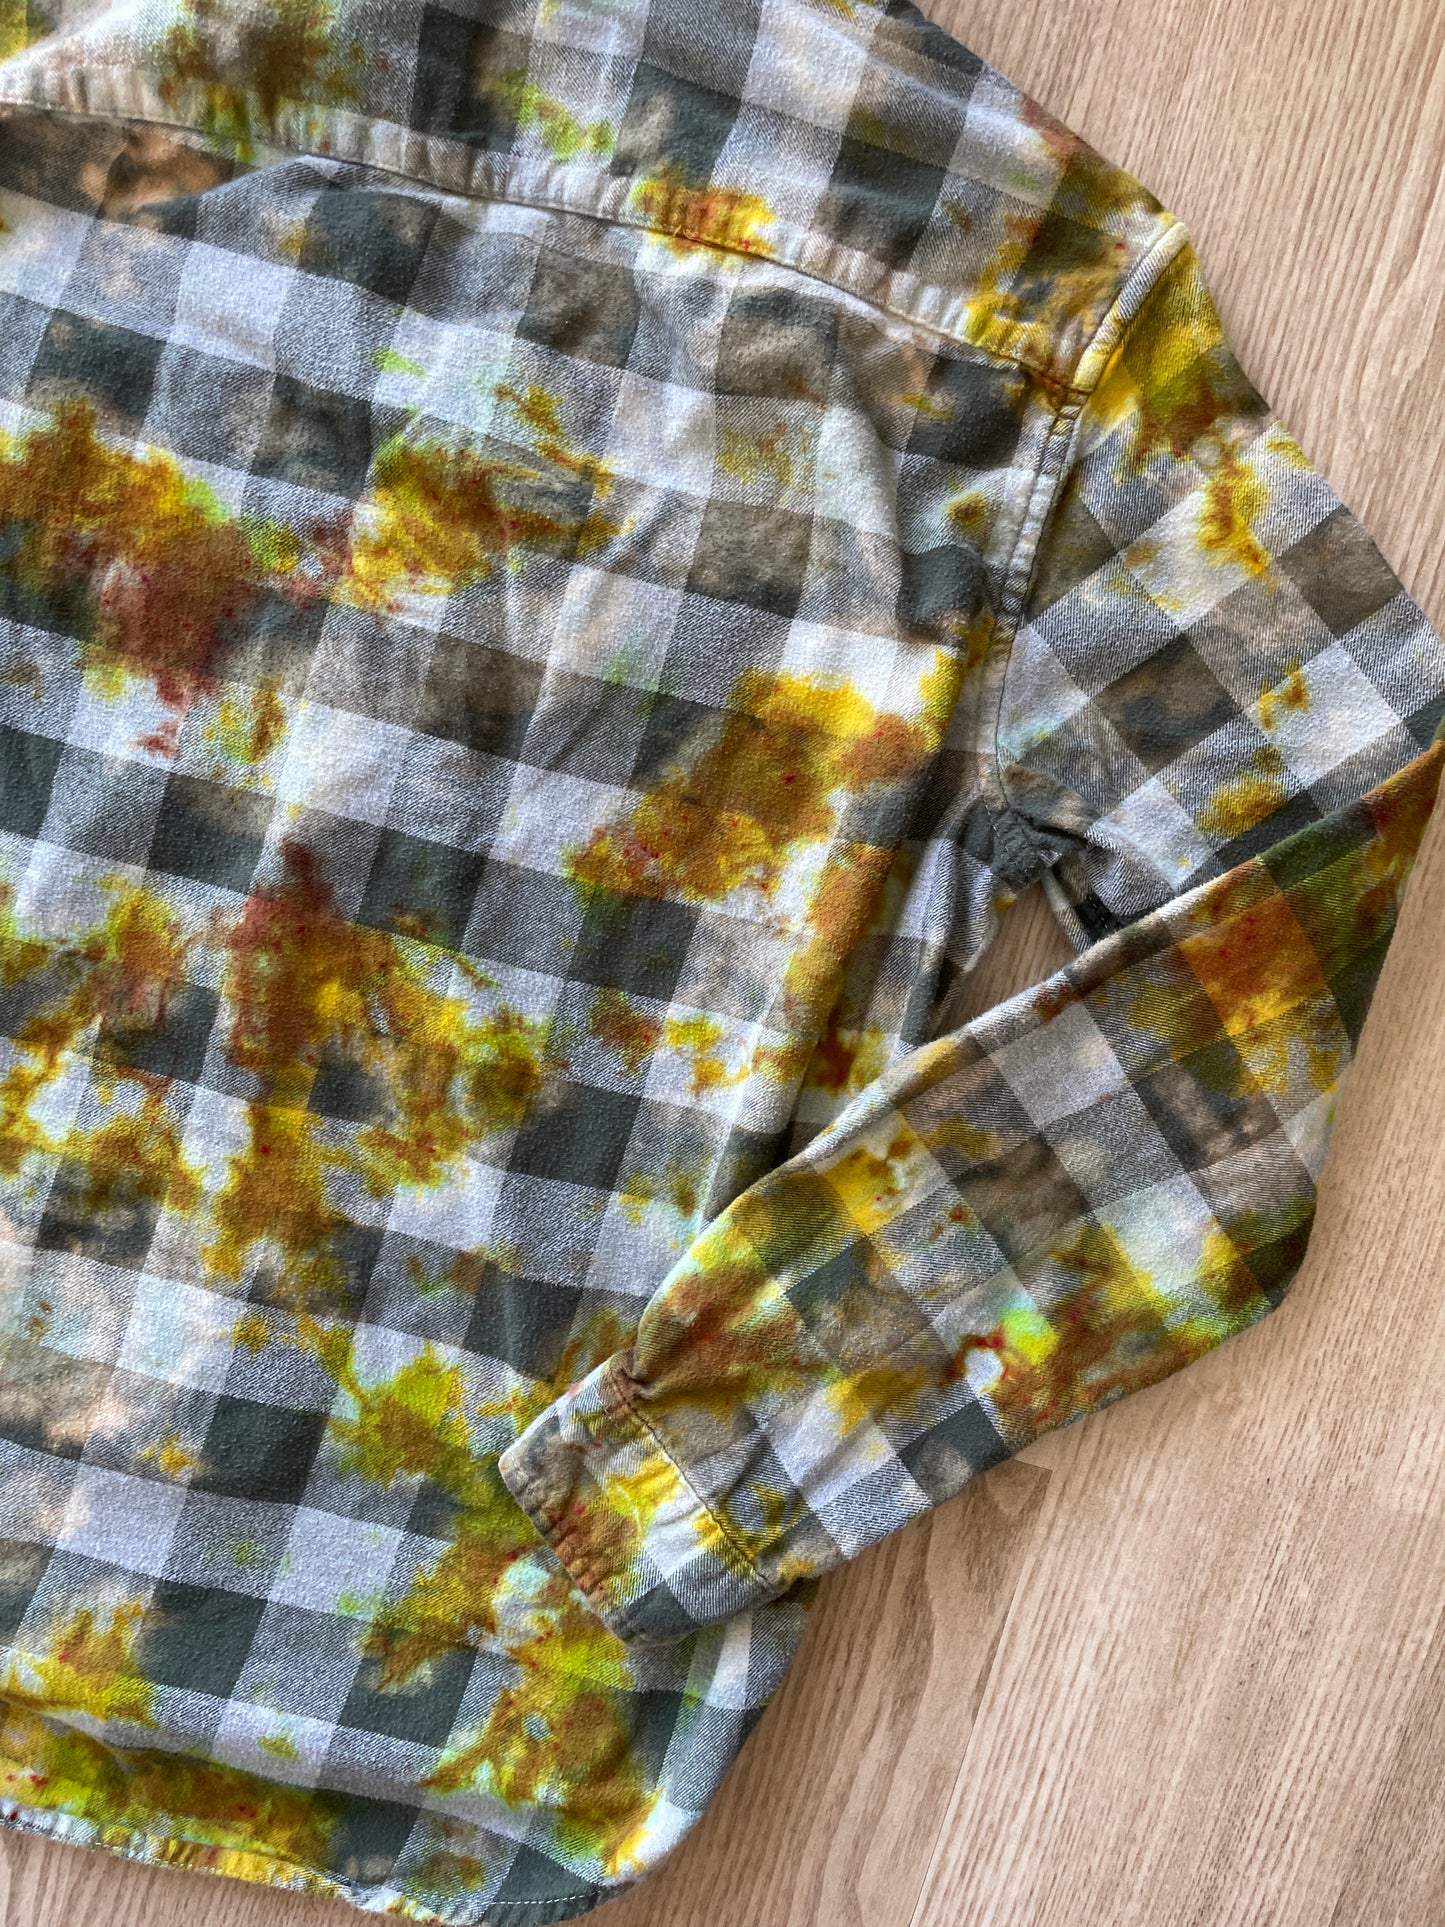 MEDIUM Men’s Climbing Shoe Green, Yellow, and White Handmade Tie Dye Flannel Shirt | One-Of-a-Kind Upcycled Long Sleeve